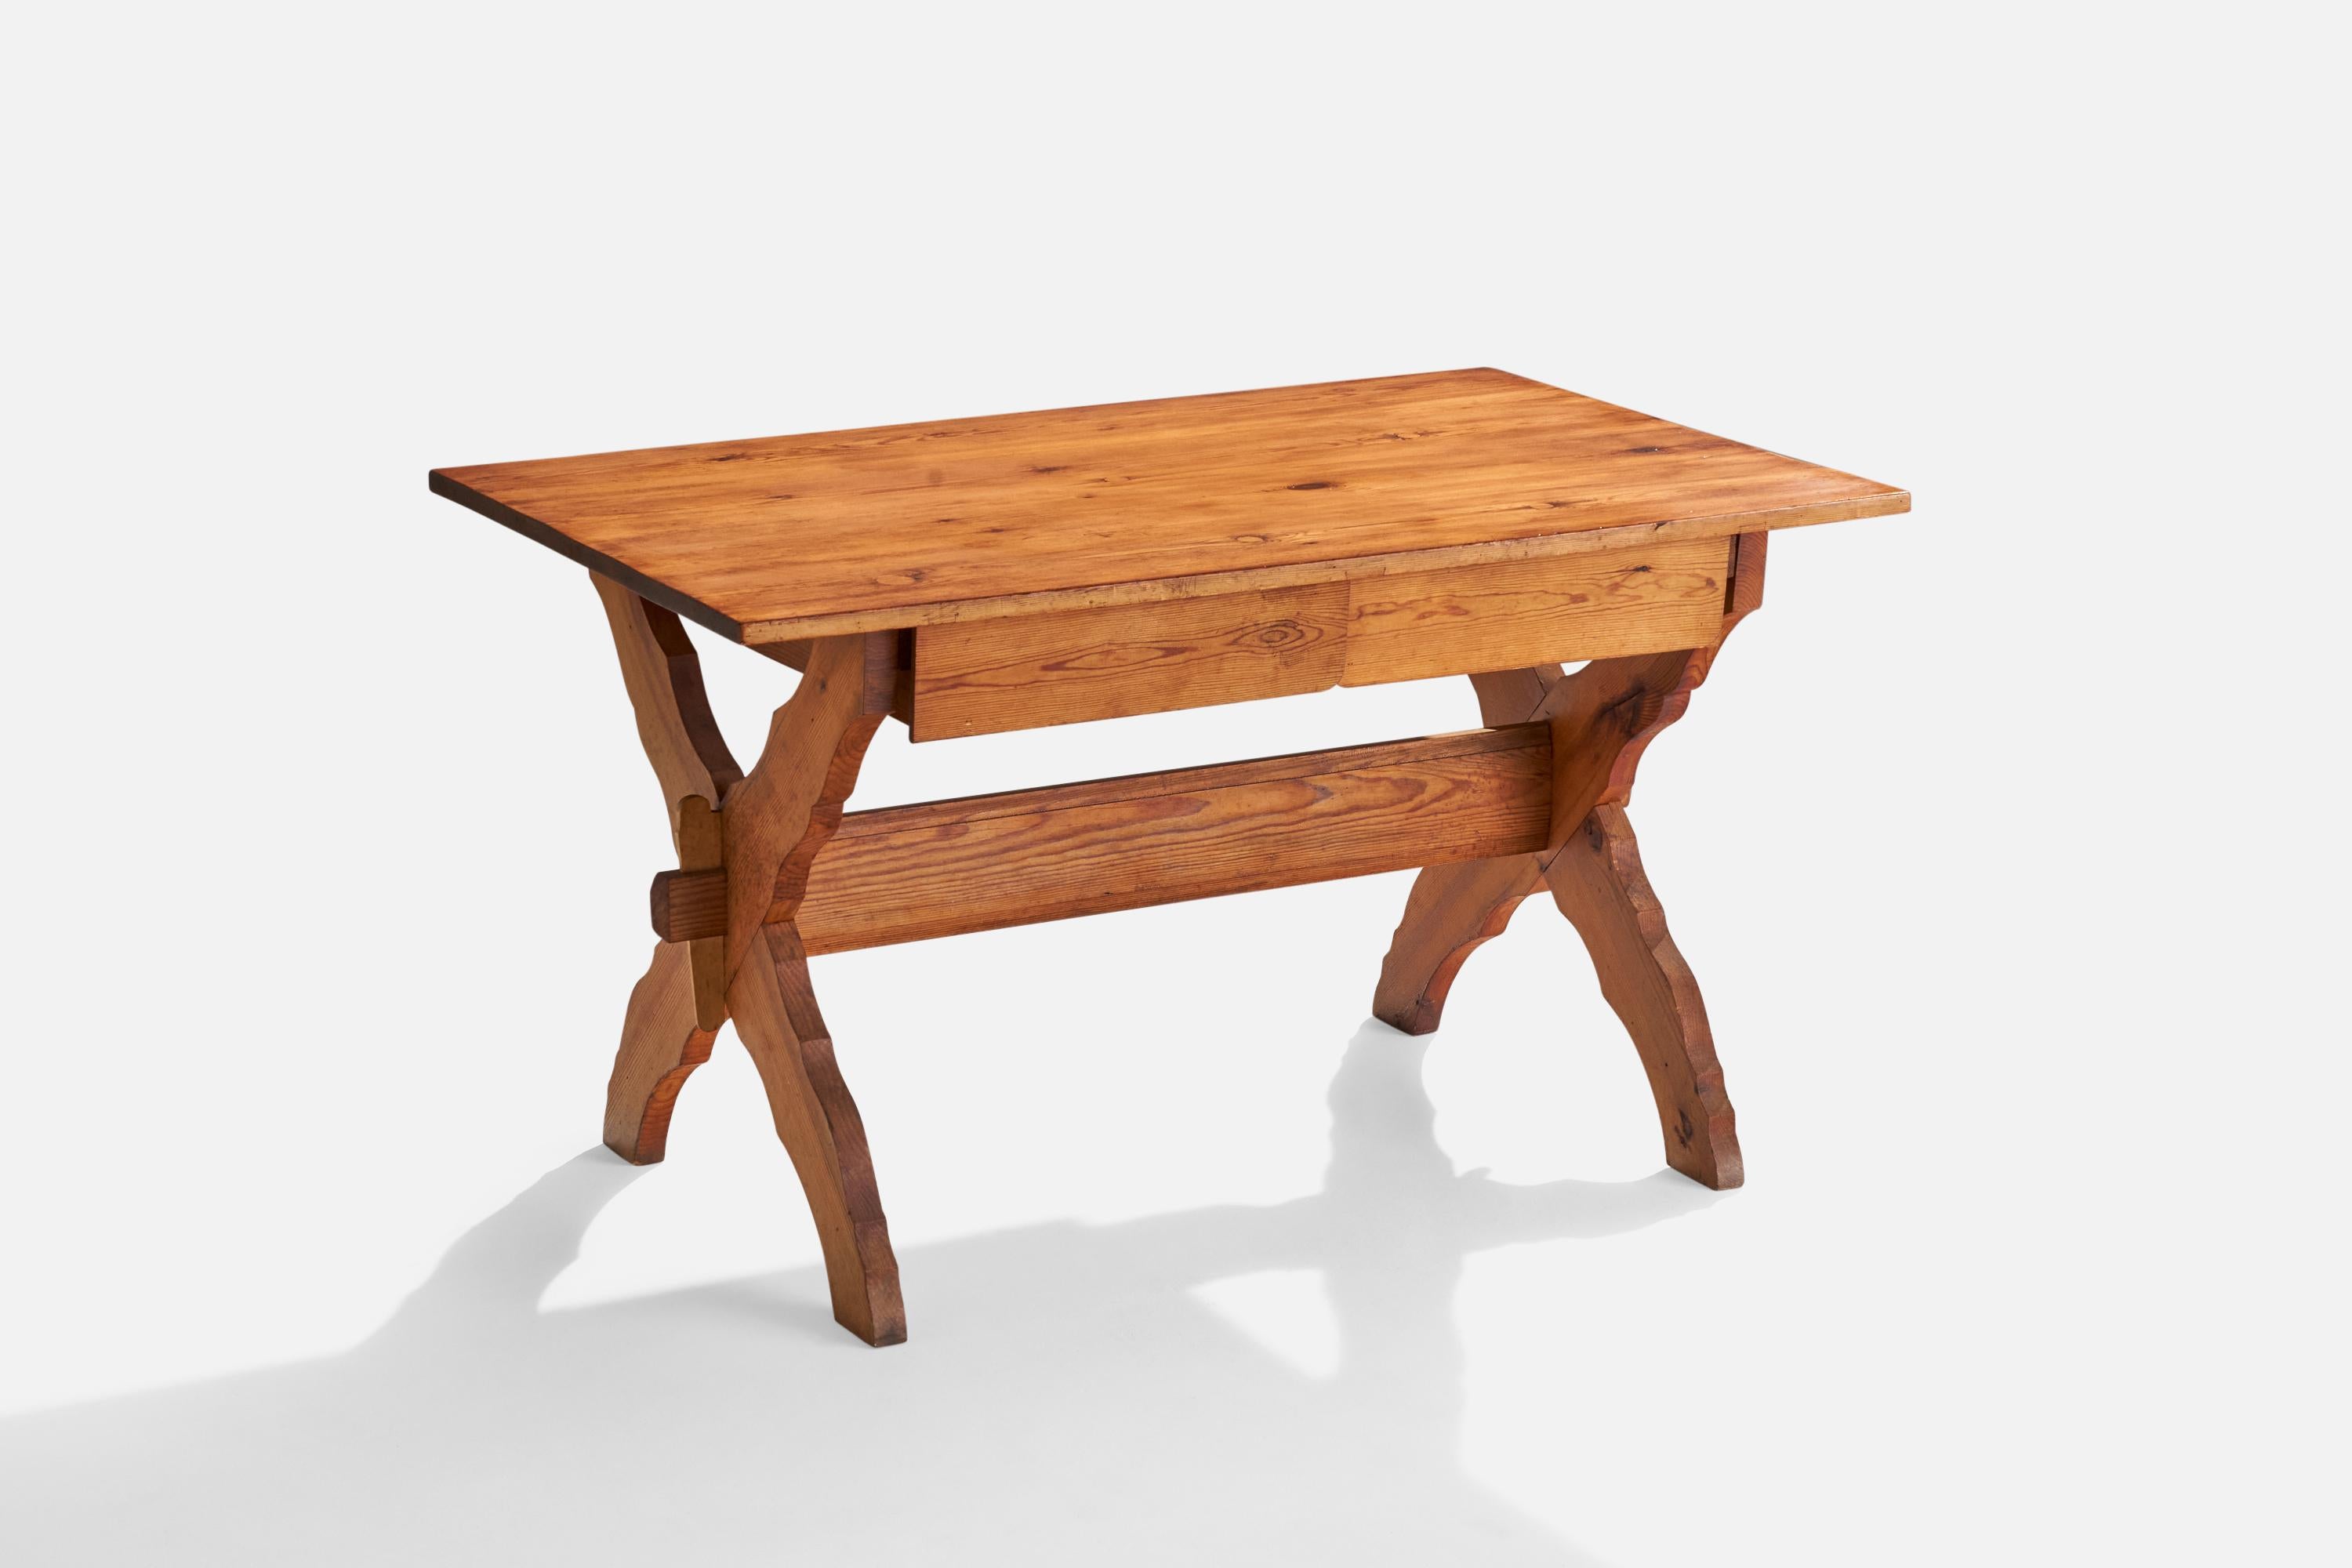 A pine table or desk designed and produced in Sweden, c. 1920s.